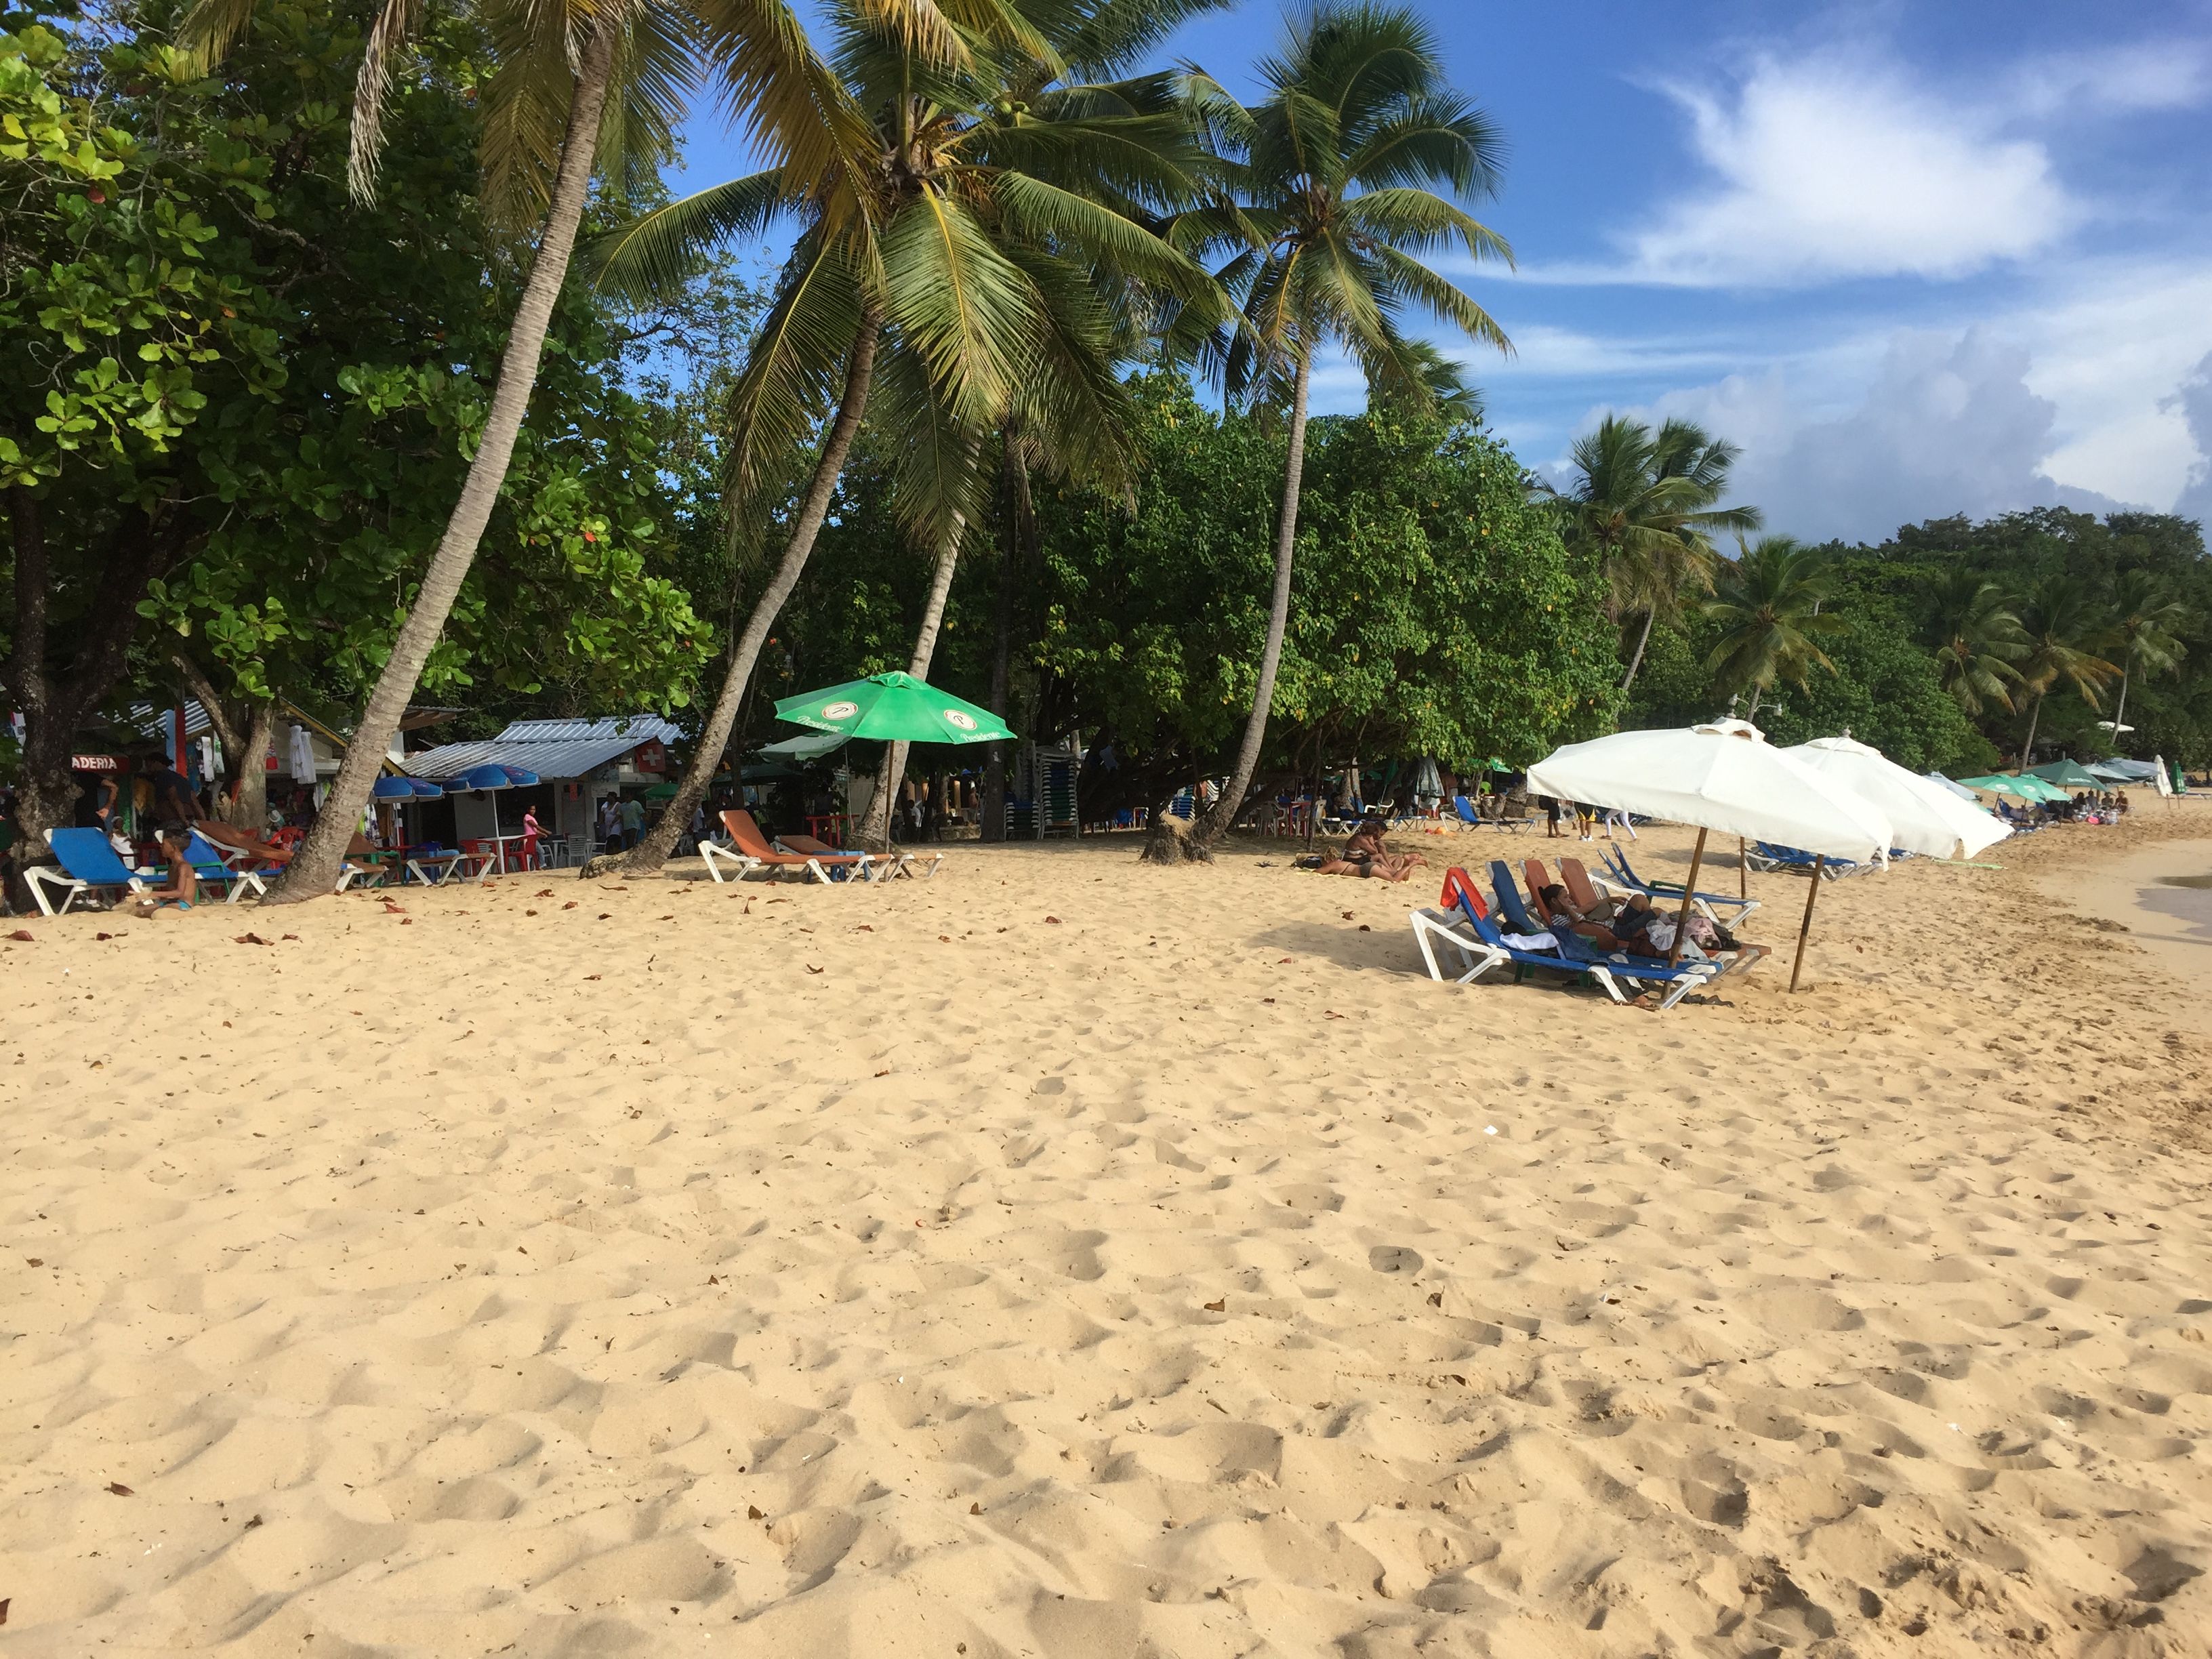 The main beach in Sosua, Dominican Republic. Women, facing few job prospects, travel to Sosua from across the island to find work in the sex industry. Locals say it’s common to see sex workers walking on the beach, looking for clients. Image by Emily Codik. Dominican Republic, 2017.